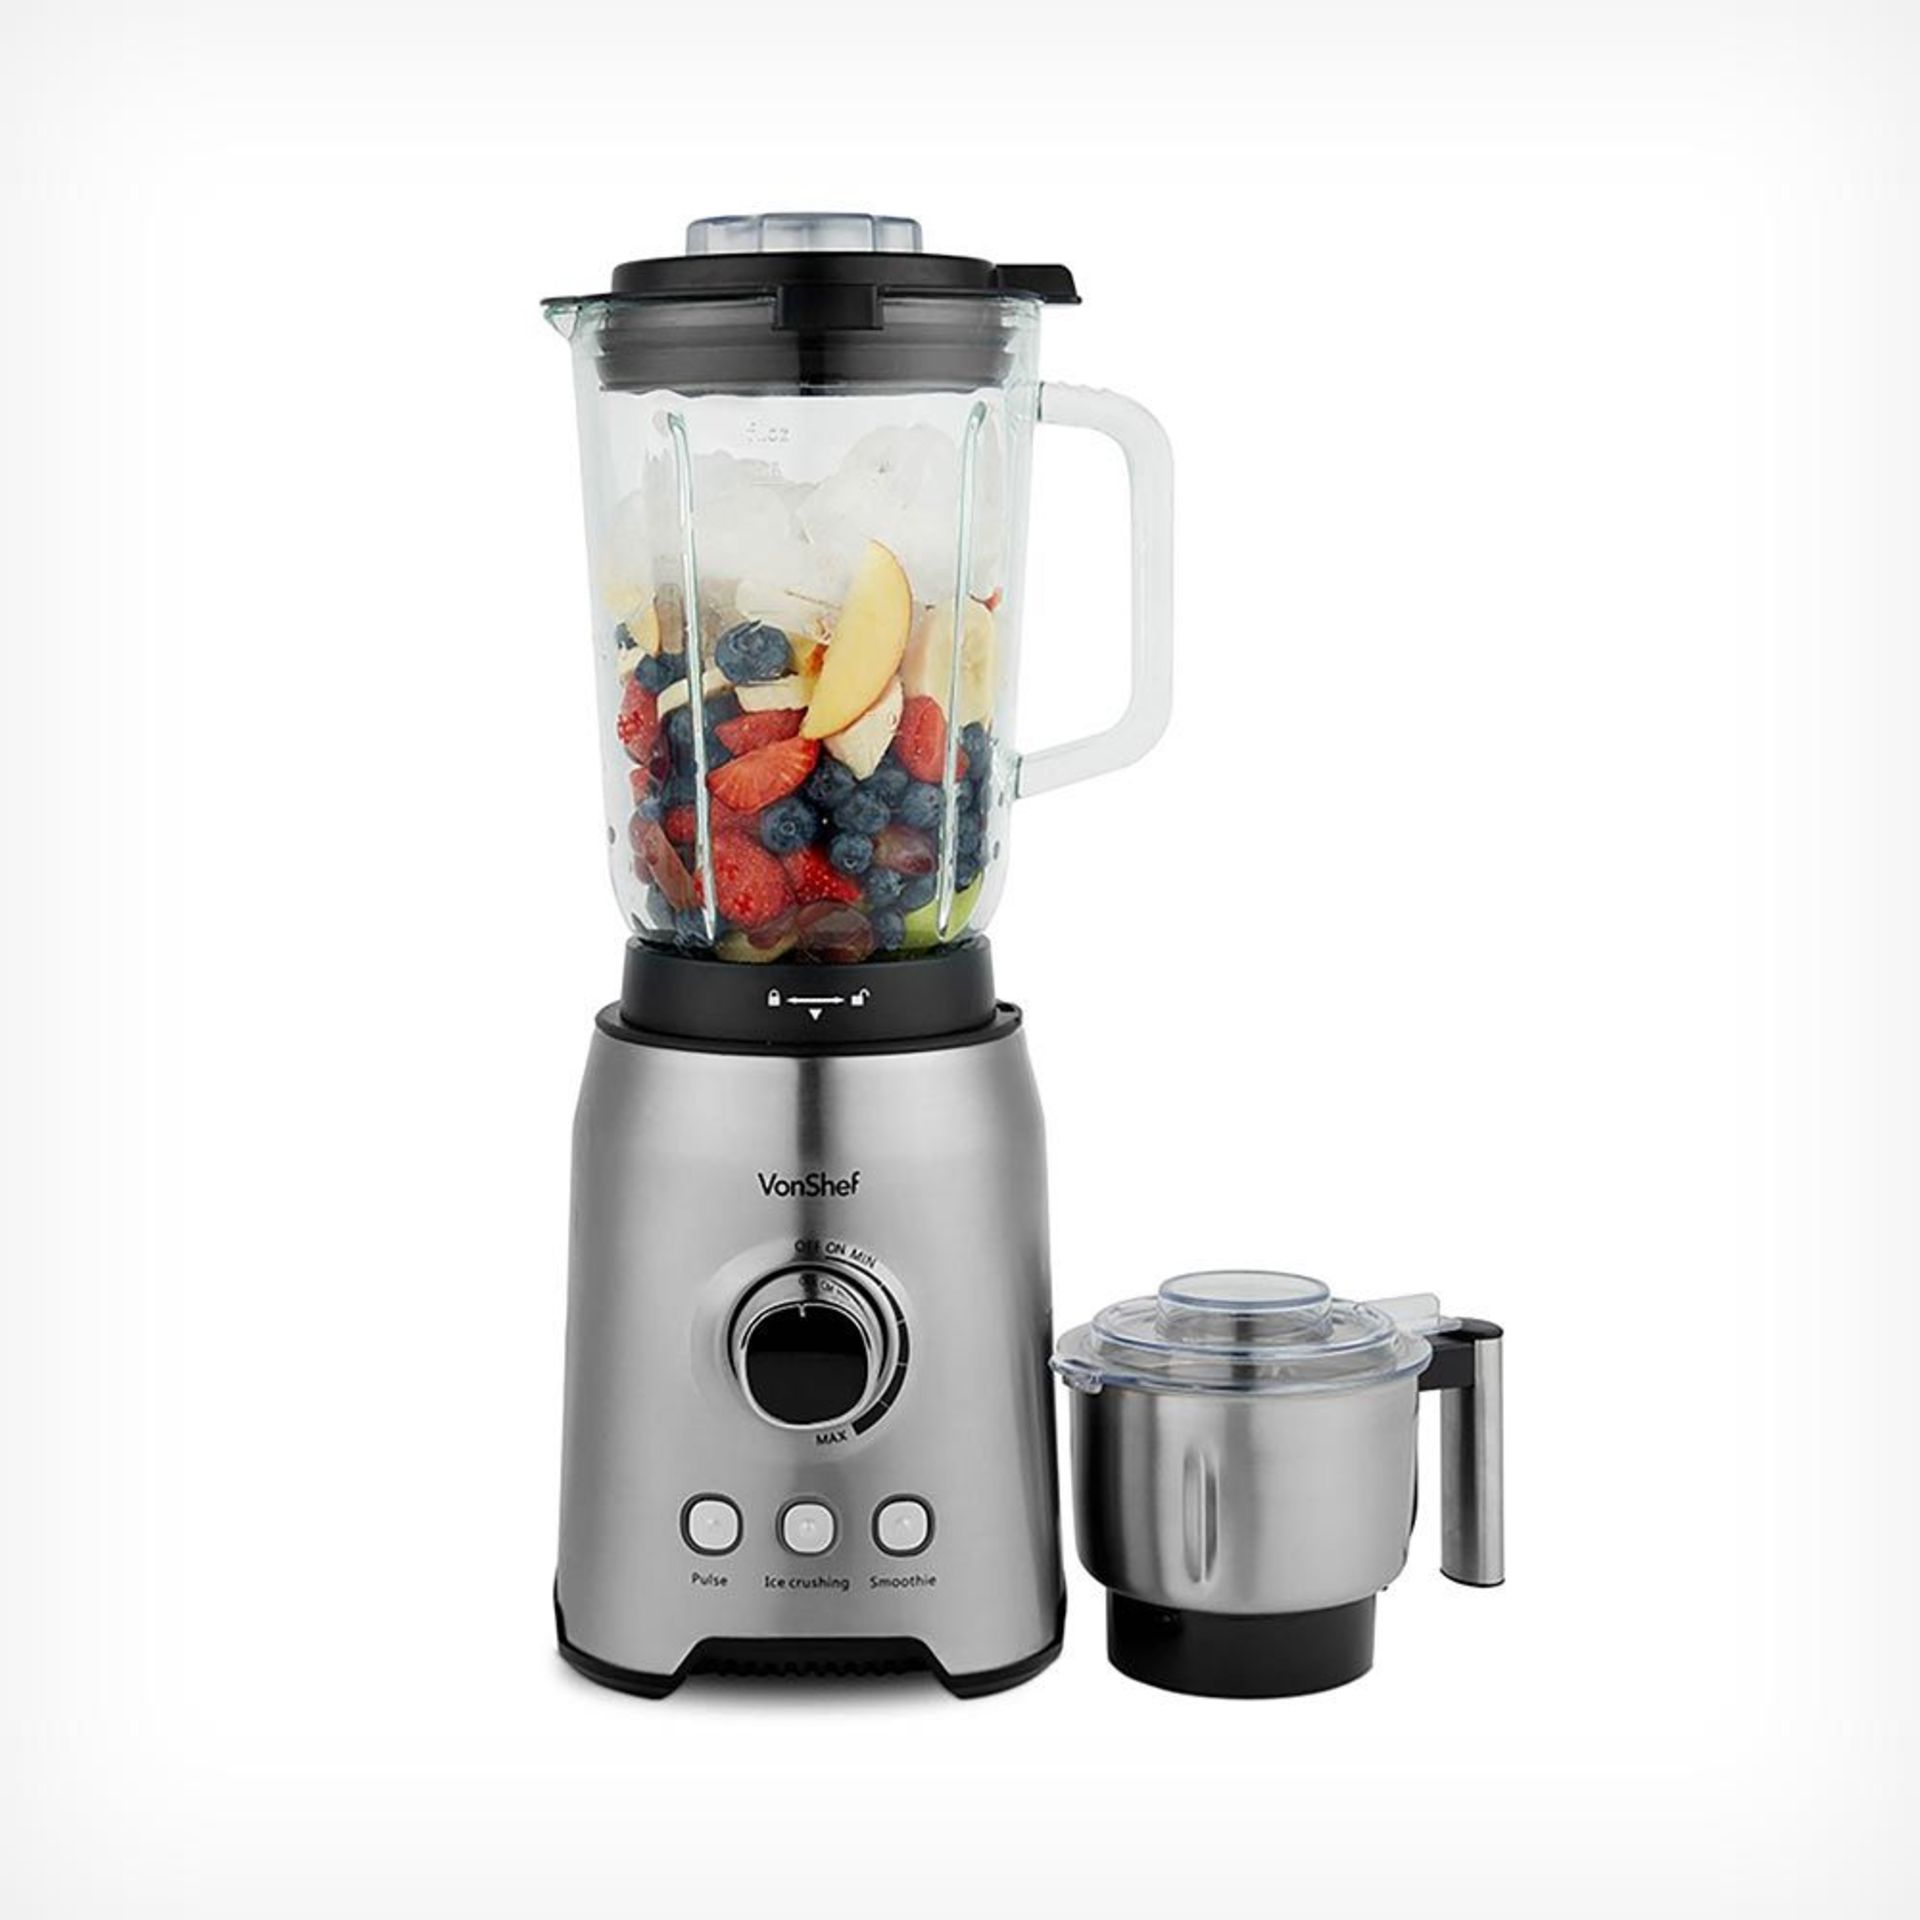 1000W Glass Jug Blender. Whether it’s for whipping up vitamin-packed smoothies, hearty soups,